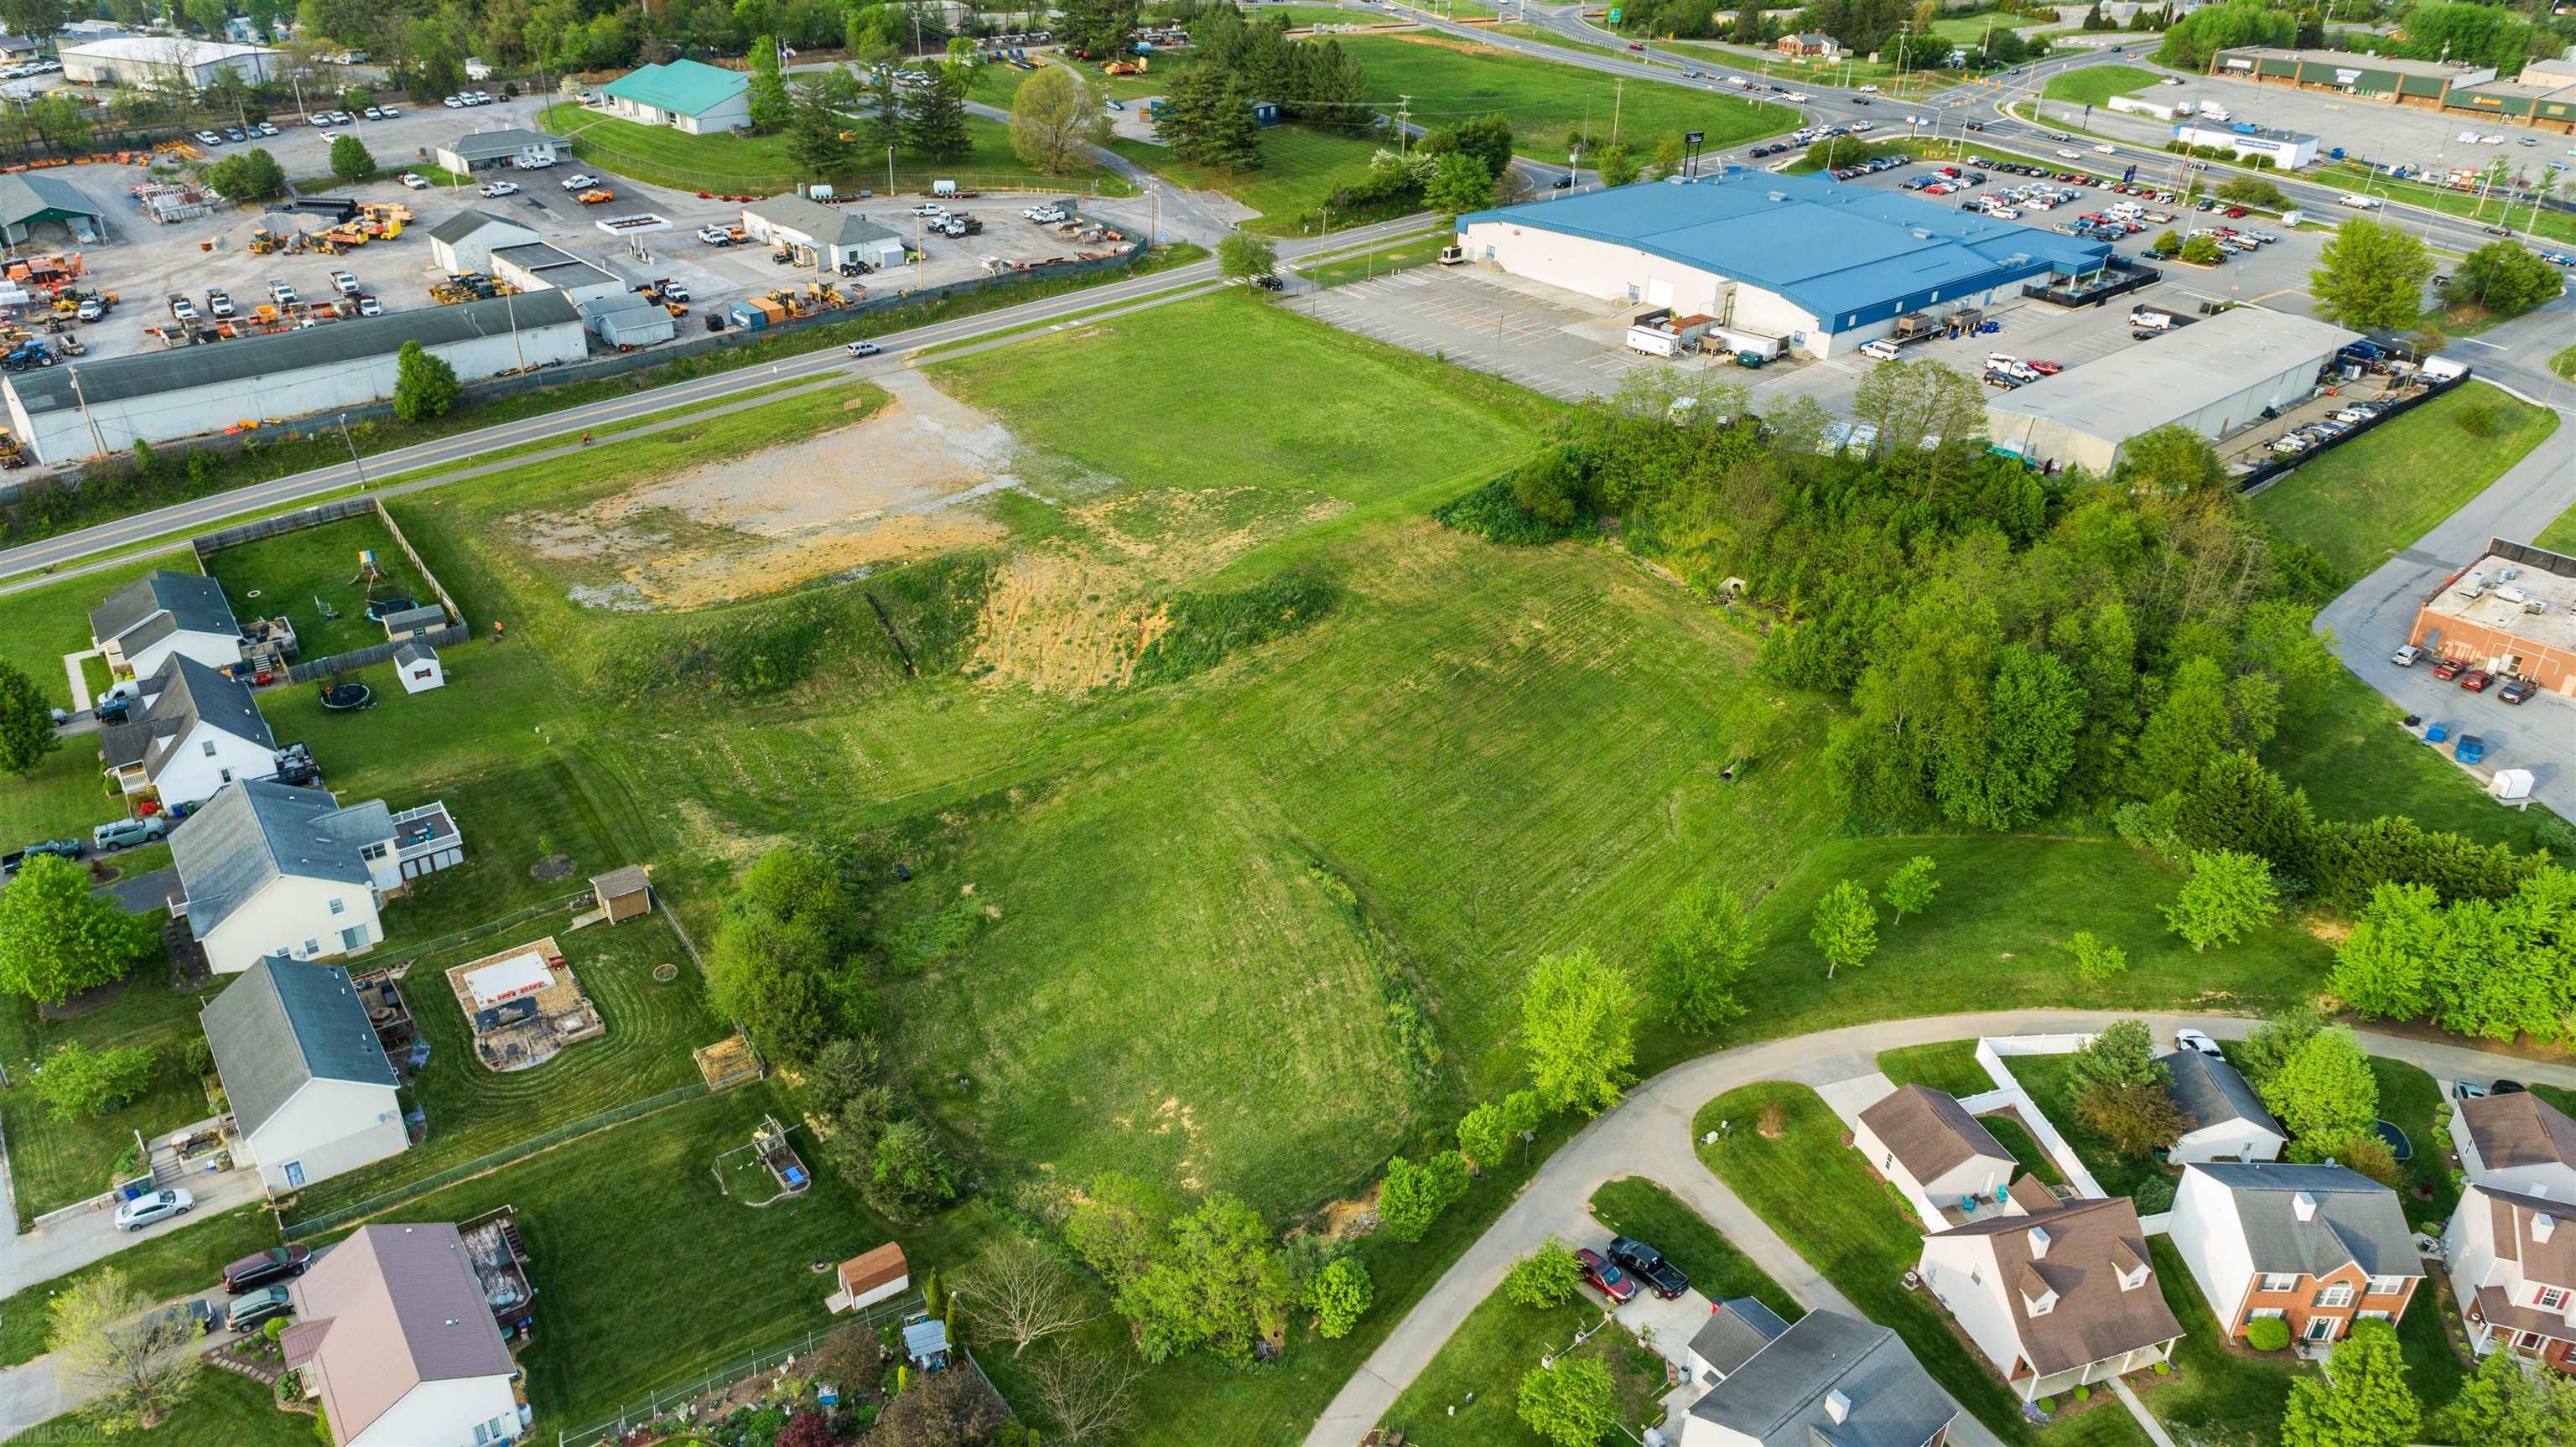 This 2.3+ acre Commercial lot is located in Christiansburg on Cambria Street, directly behind the Christiansburg Recreation Center with direct access to the Huckleberry Trail.  Great location with high visibility and high traffic count.  Easy access from 460 Business and I-81.  This property is zoned B3/General Business with many uses available. (Church, restaurant, retail, repair/service facility, storage buildings, athletic facility, professional offices, etc.) Additional 2.5-acre tract also available direct beside this lot.  MLS#